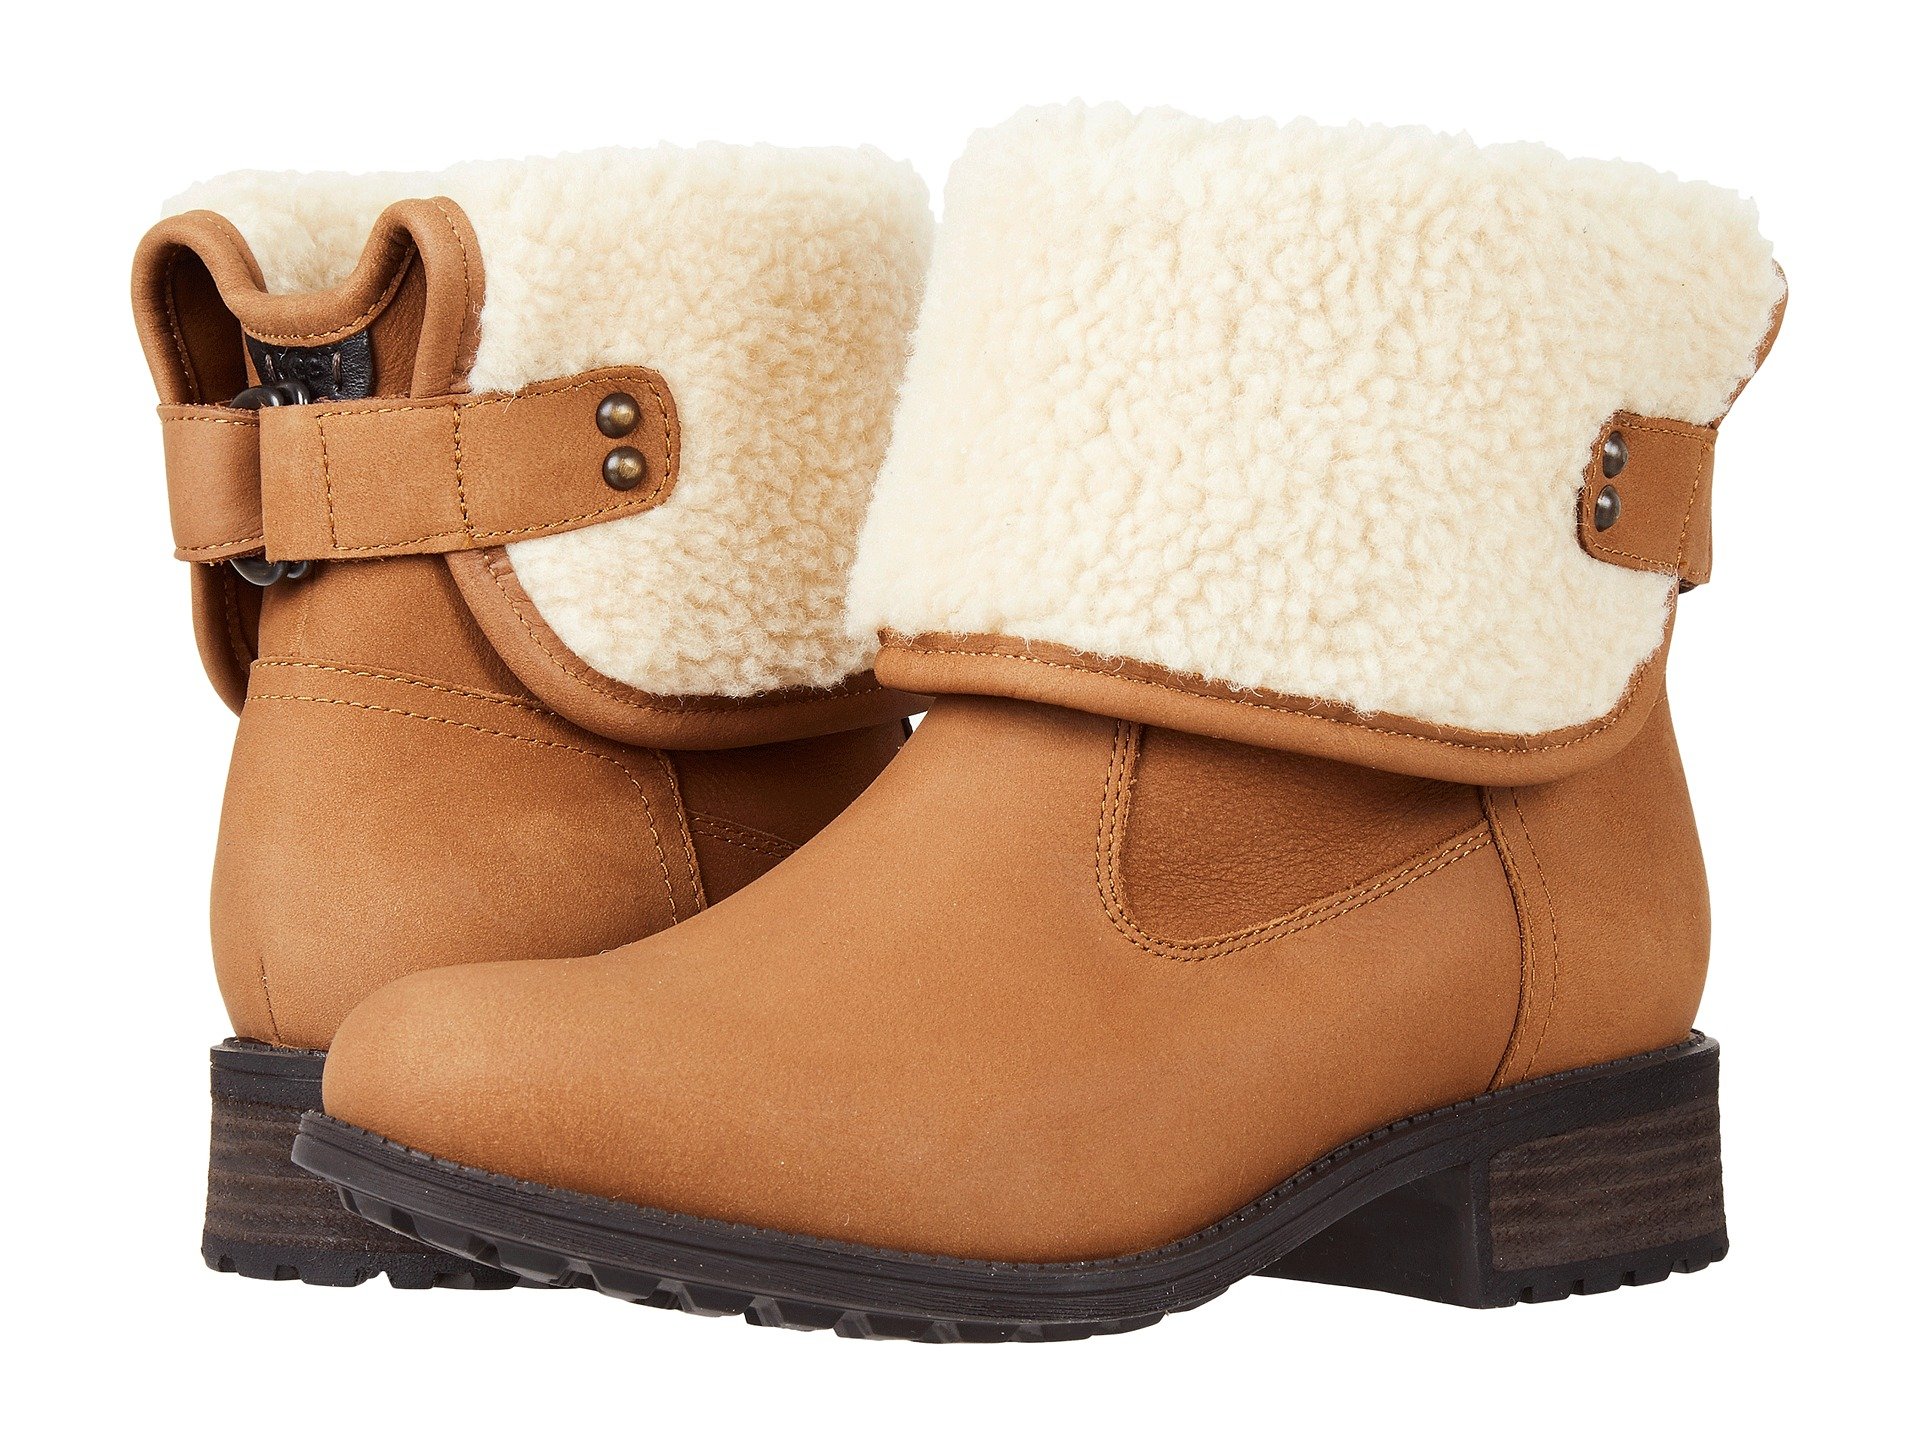 score-these-convertible-ugg-boots-and-more-on-major-sale